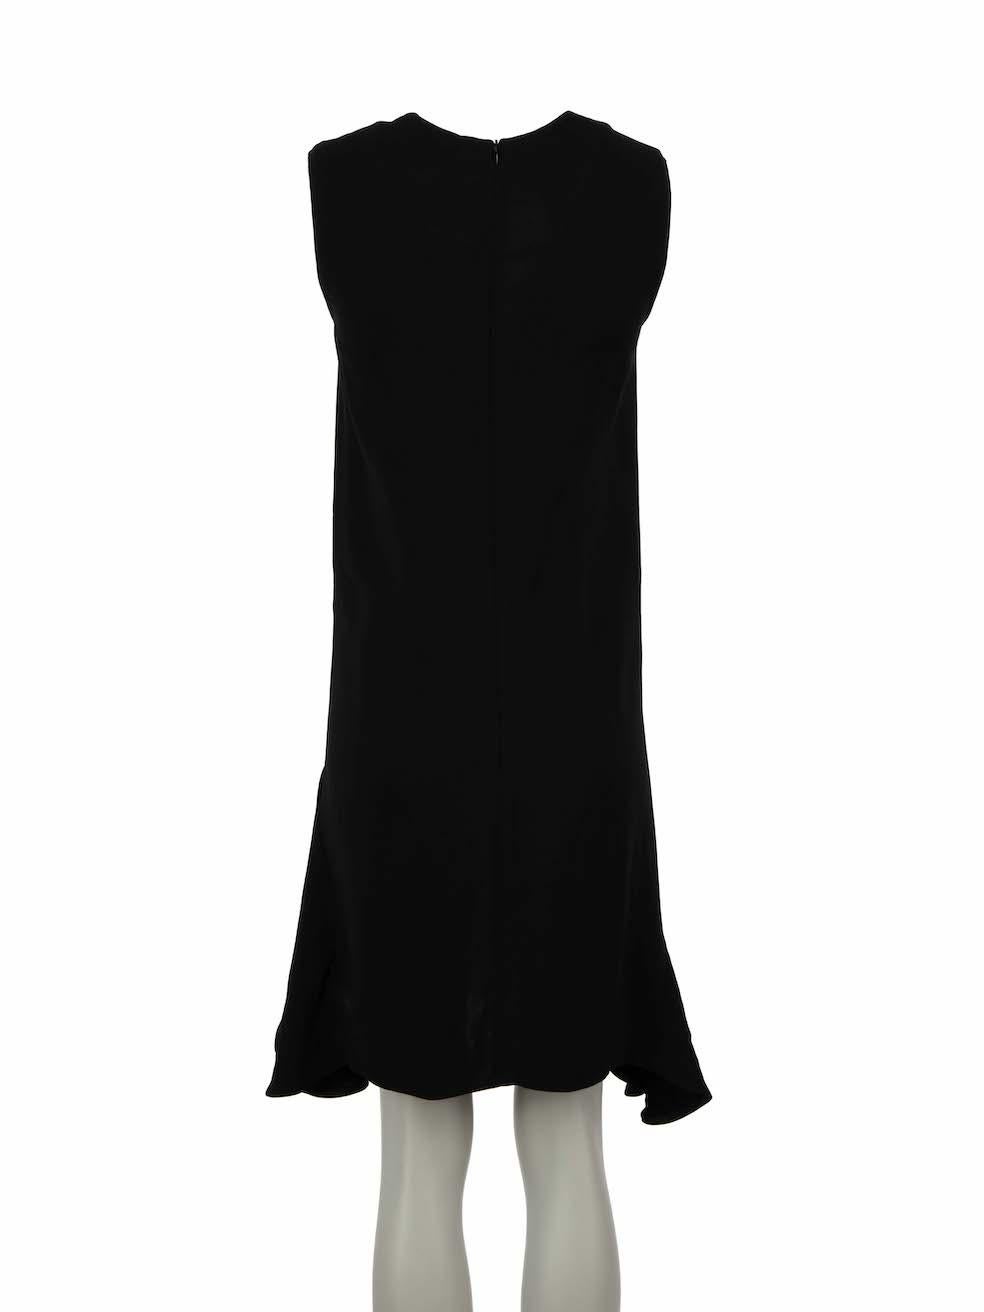 Stella McCartney Monochrome Sleeveless Knee Dress Size XS In Good Condition For Sale In London, GB